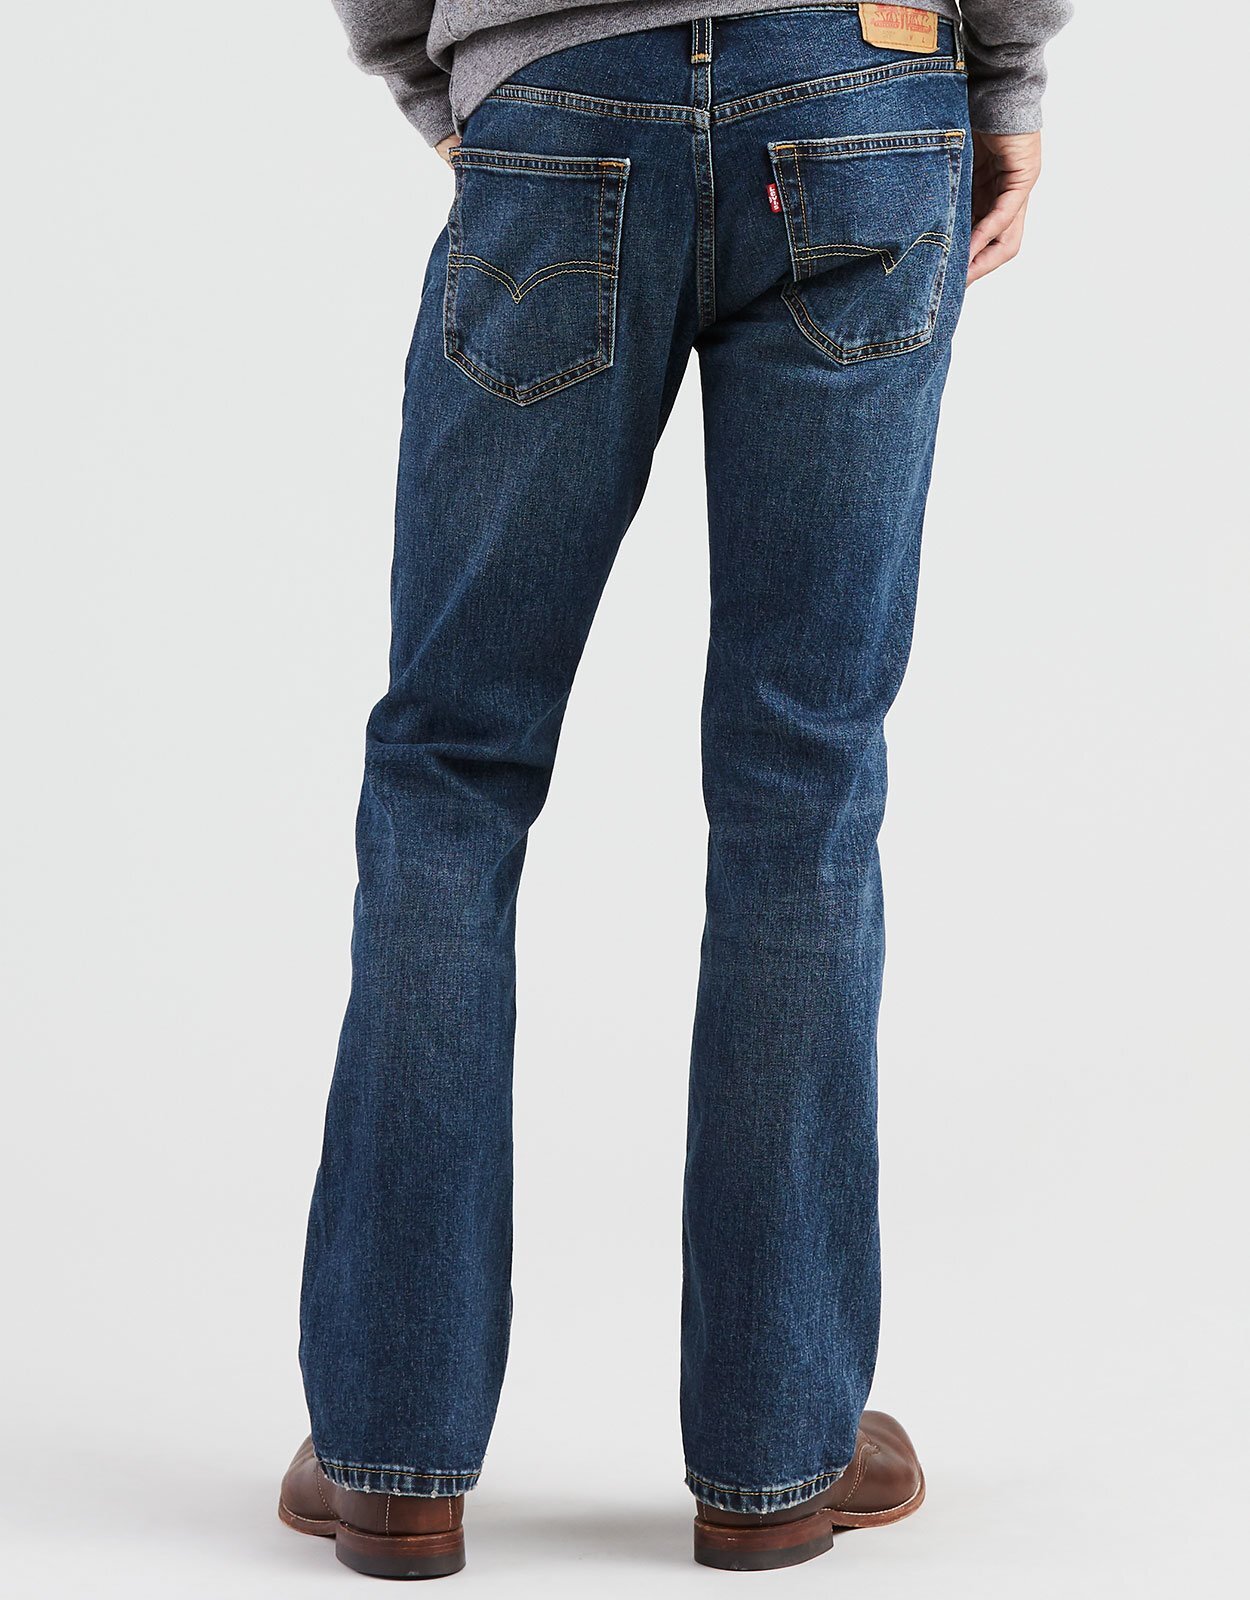 jeans similar to levis 527